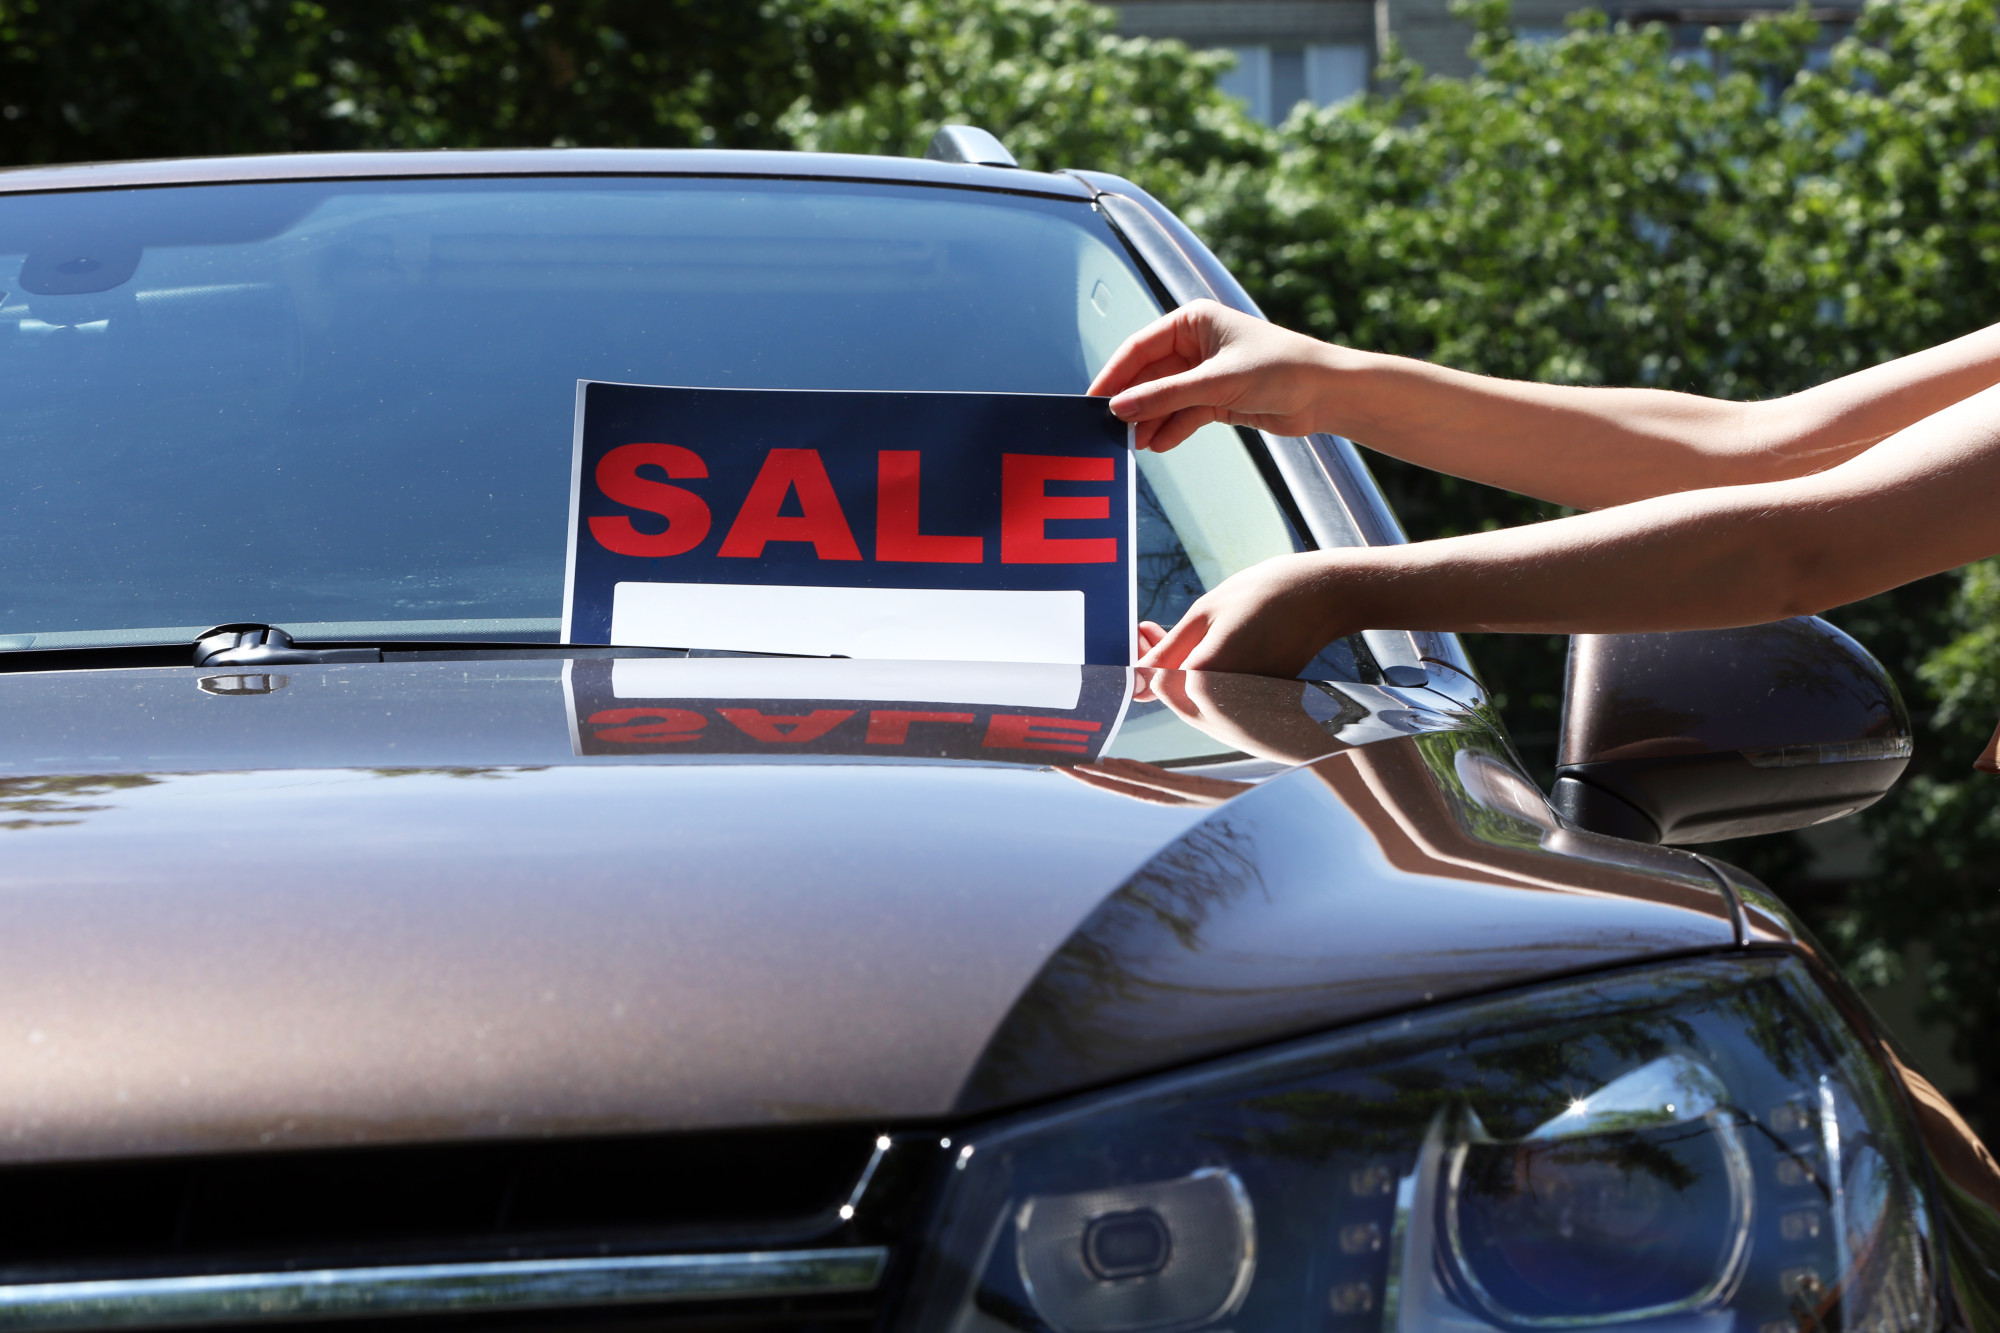 Car with For Sale Sign